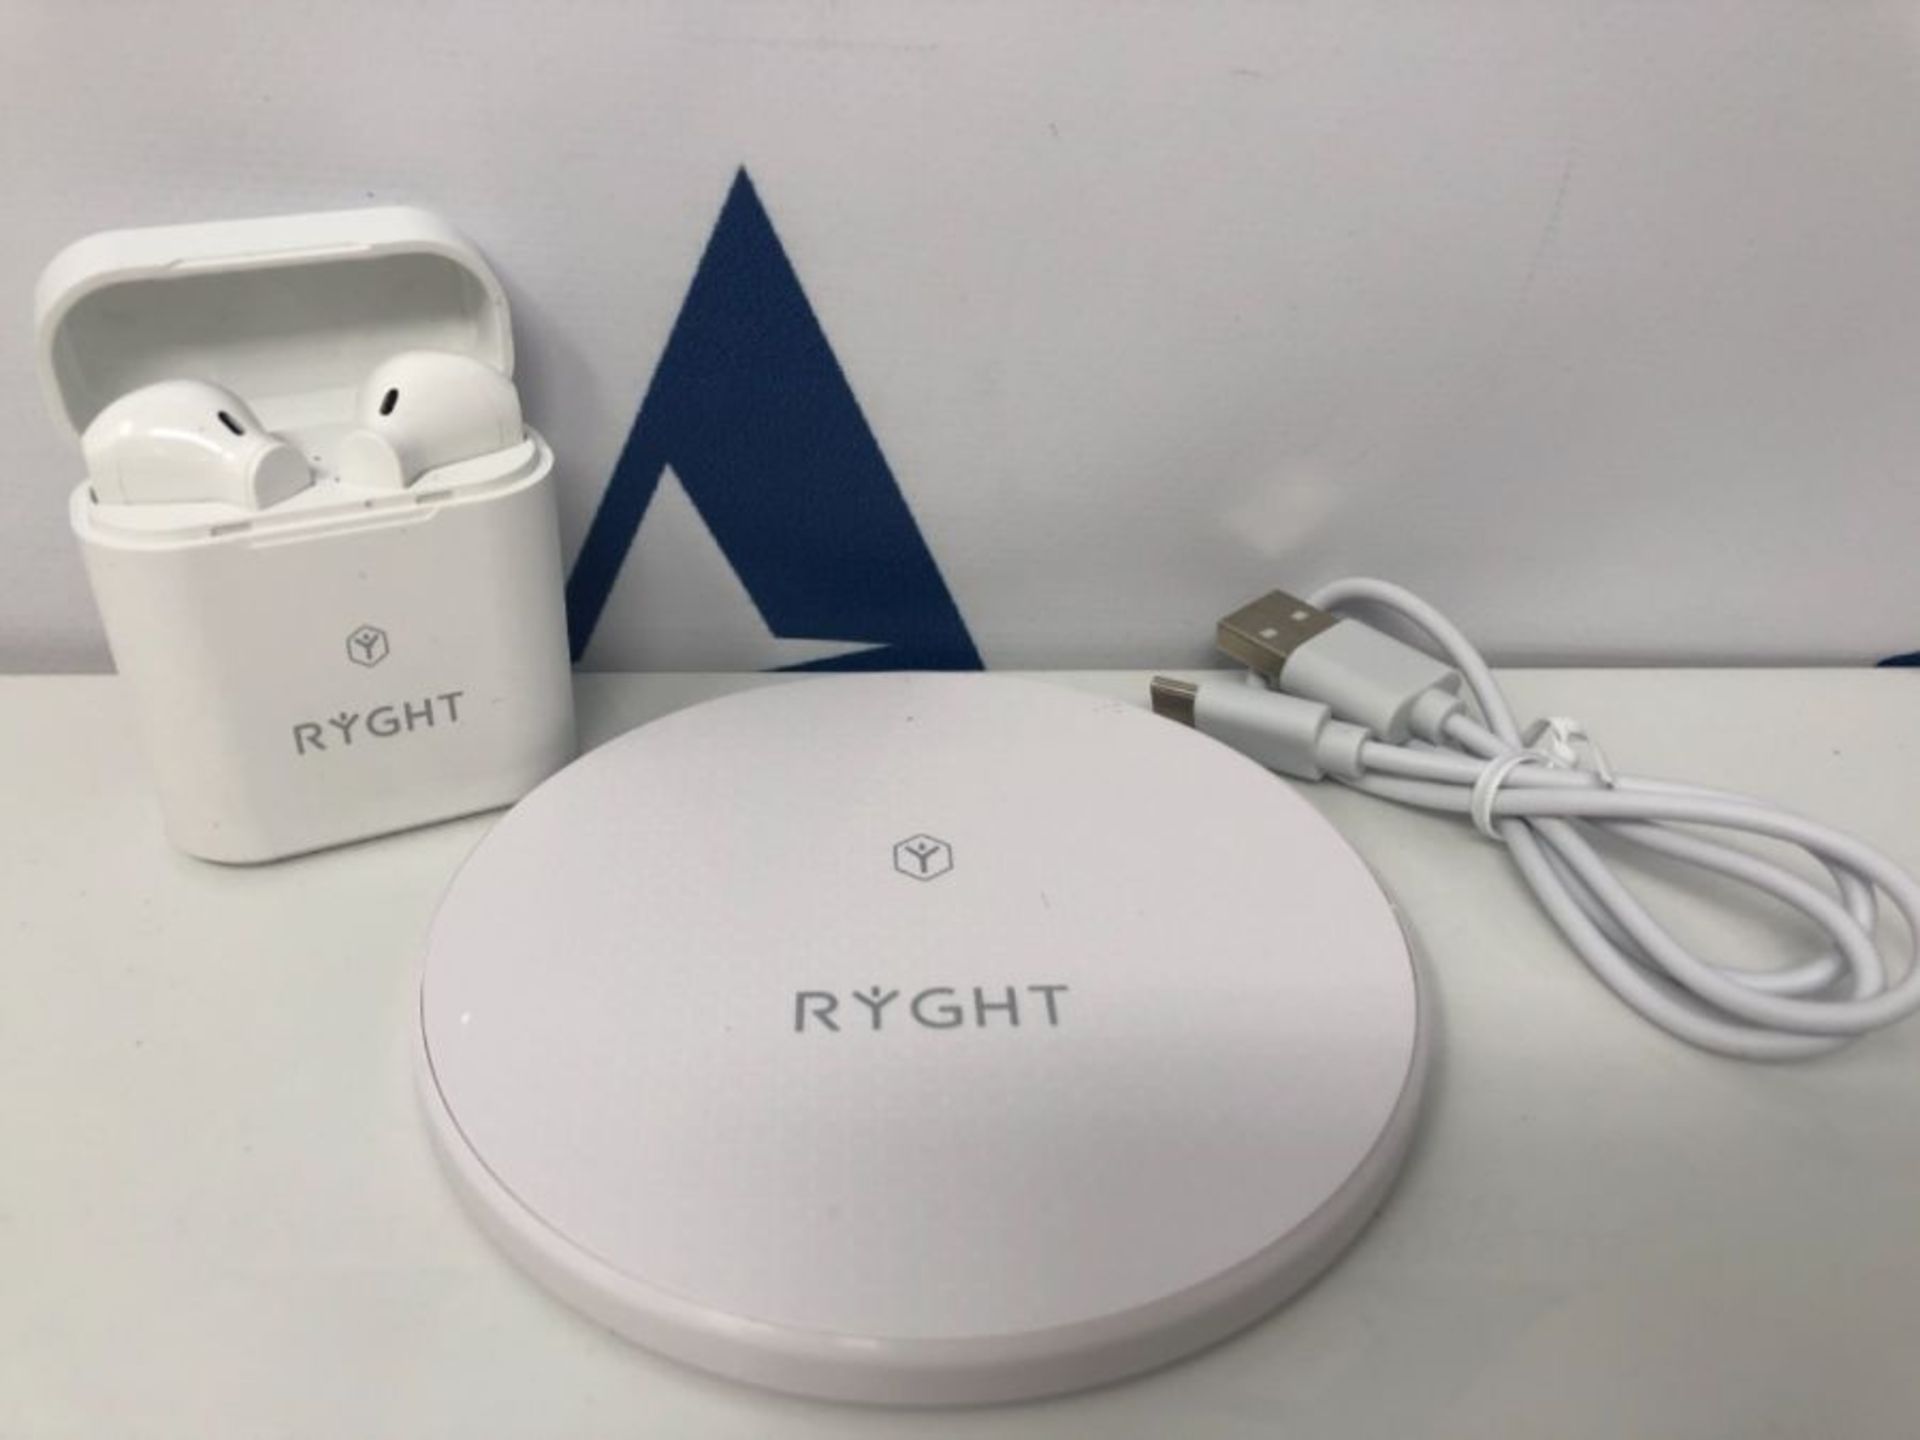 RYGHT Jam+ R480316 Wireless Headphones + Induction Charger - White - Image 2 of 3